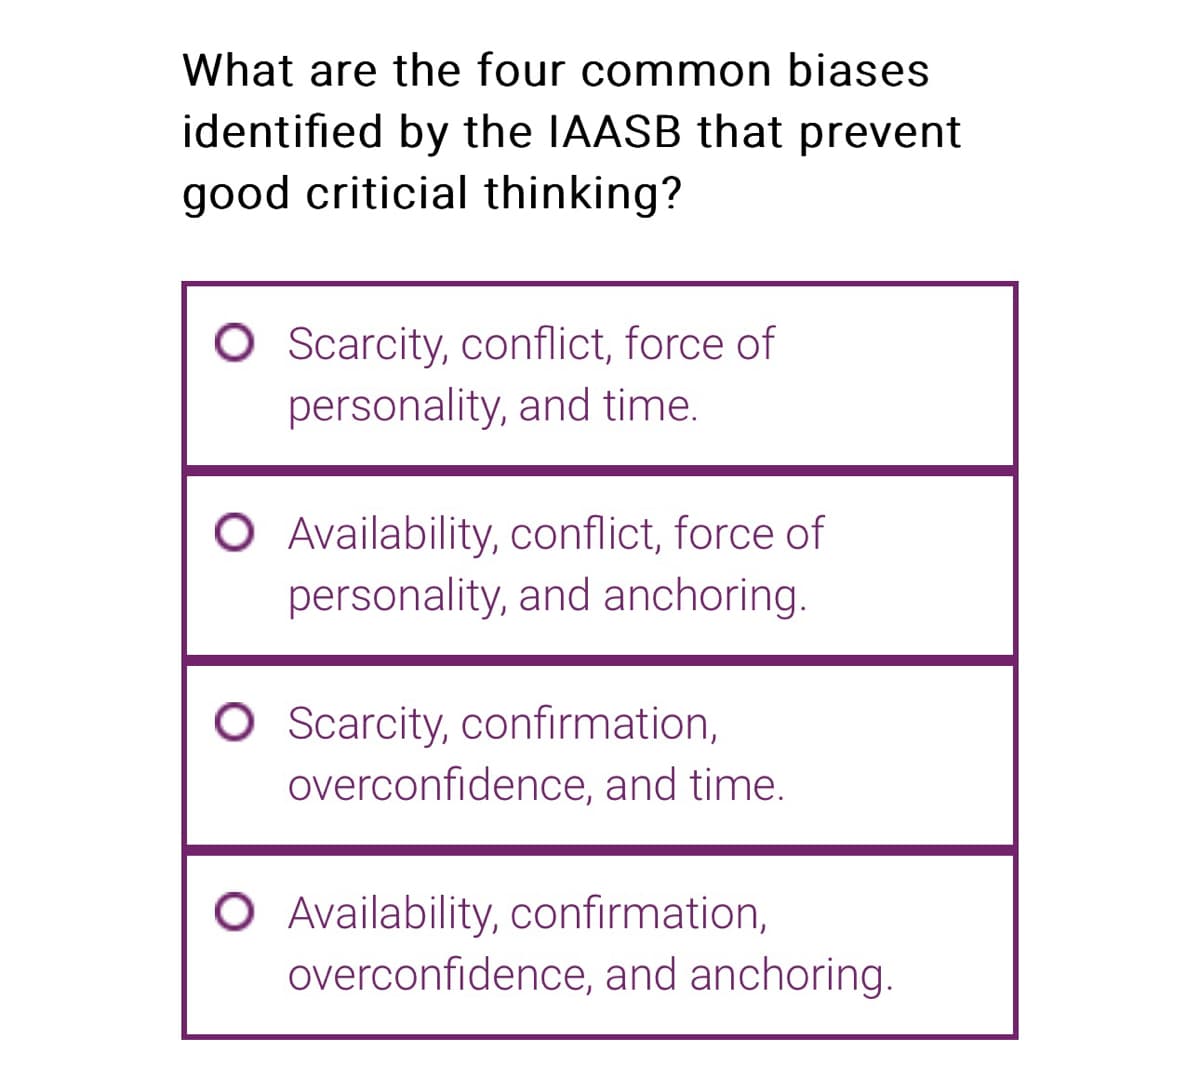 What are the four common biases
identified by the IAASB that prevent
good criticial thinking?
O Scarcity, conflict, force of
personality, and time.
O Availability, conflict, force of
personality, and anchoring.
O Scarcity, confirmation,
overconfidence, and time.
O Availability, confirmation,
overconfidence, and anchoring.